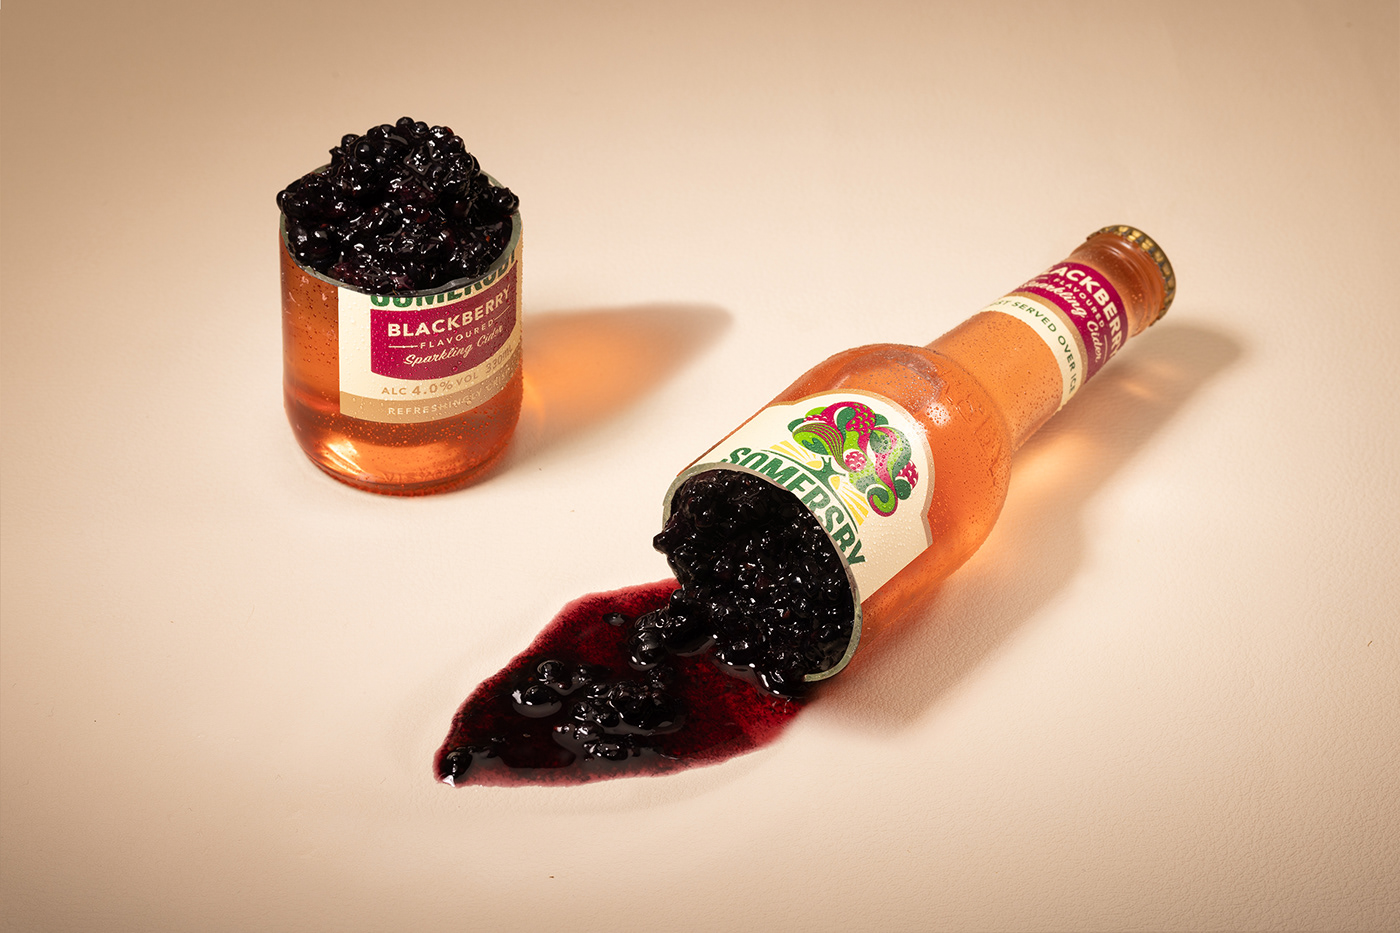 A cider bottle photographed to appear to have been "cut" opened, with crushed blackberries inside.